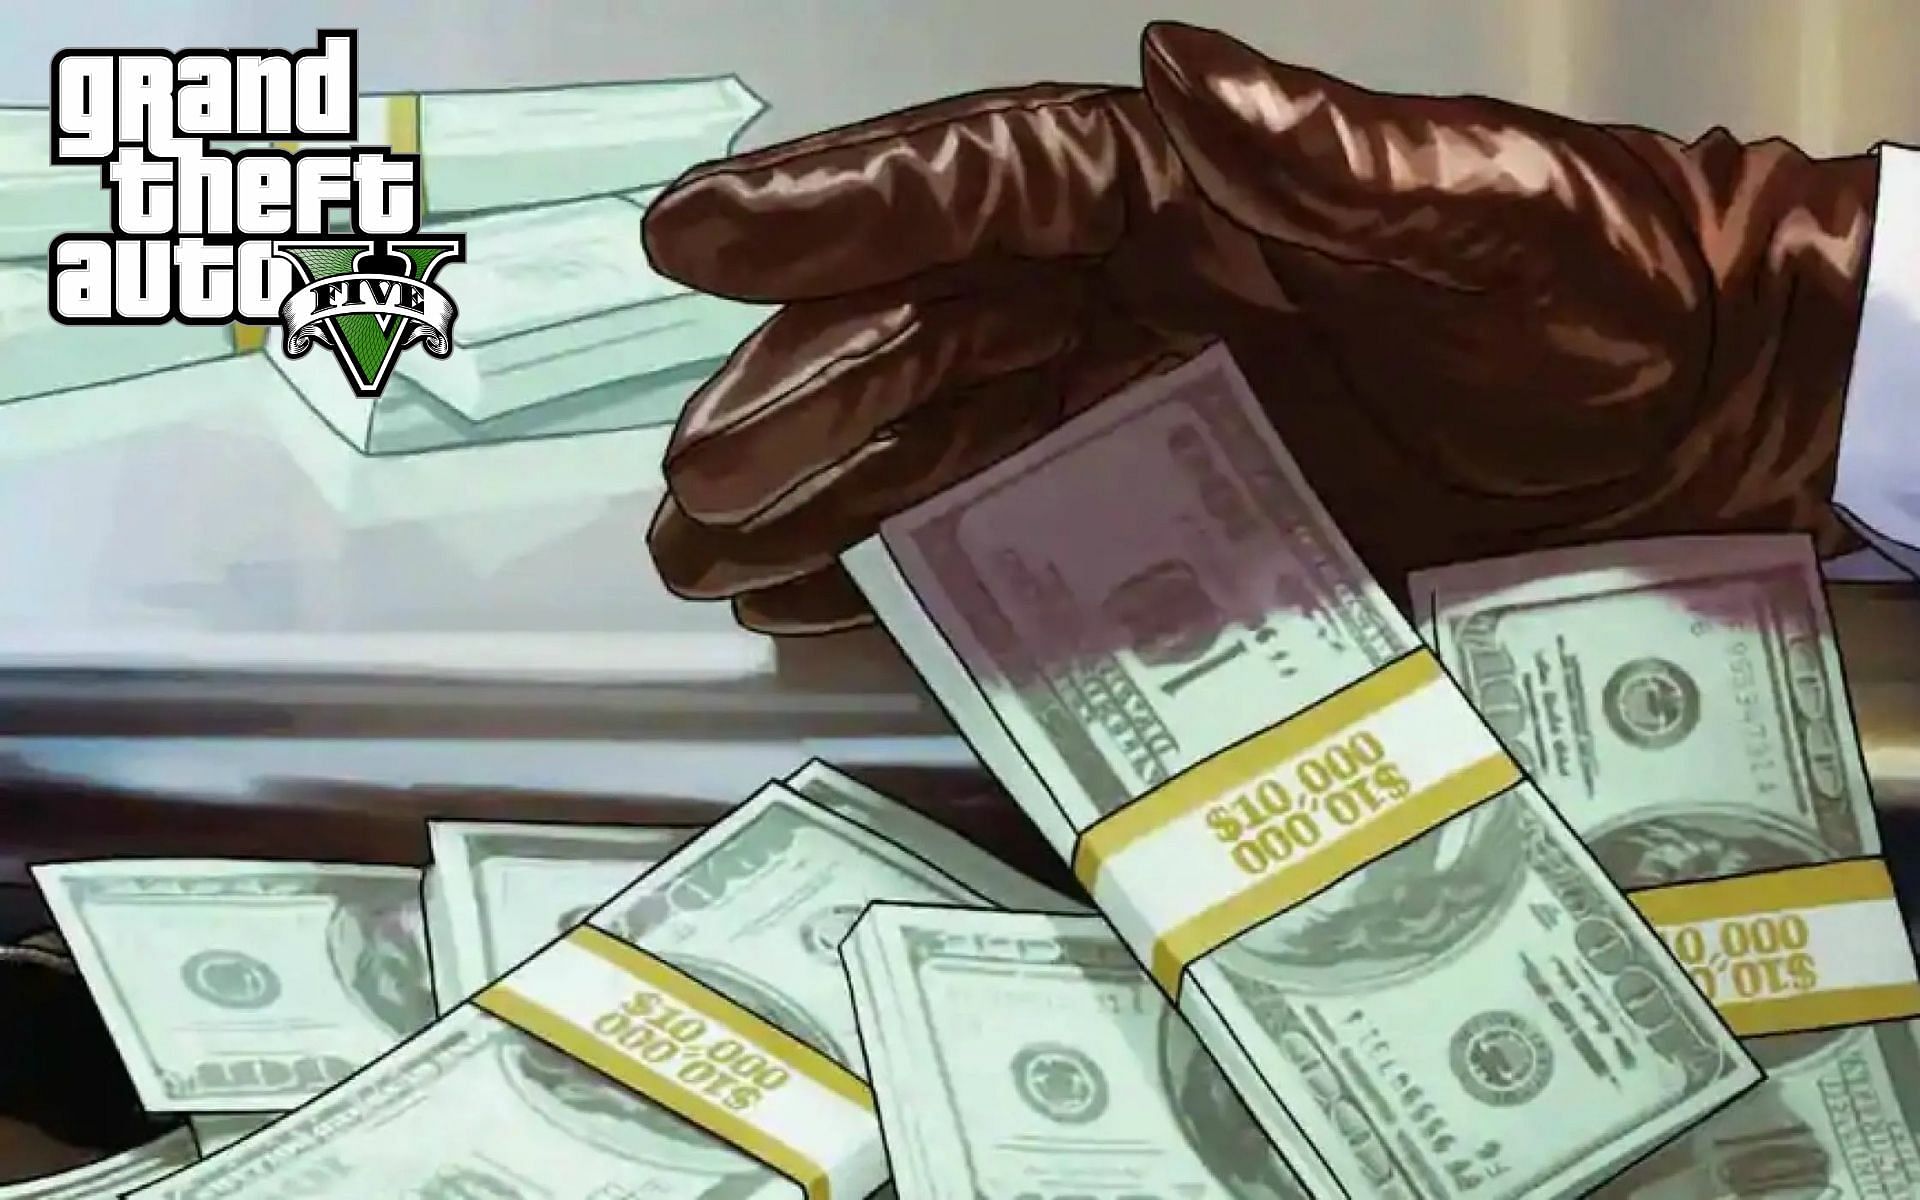 Rockstar and Take-Two continue to make a tidy profit from GTA 5 (Image via Rockstar Games)